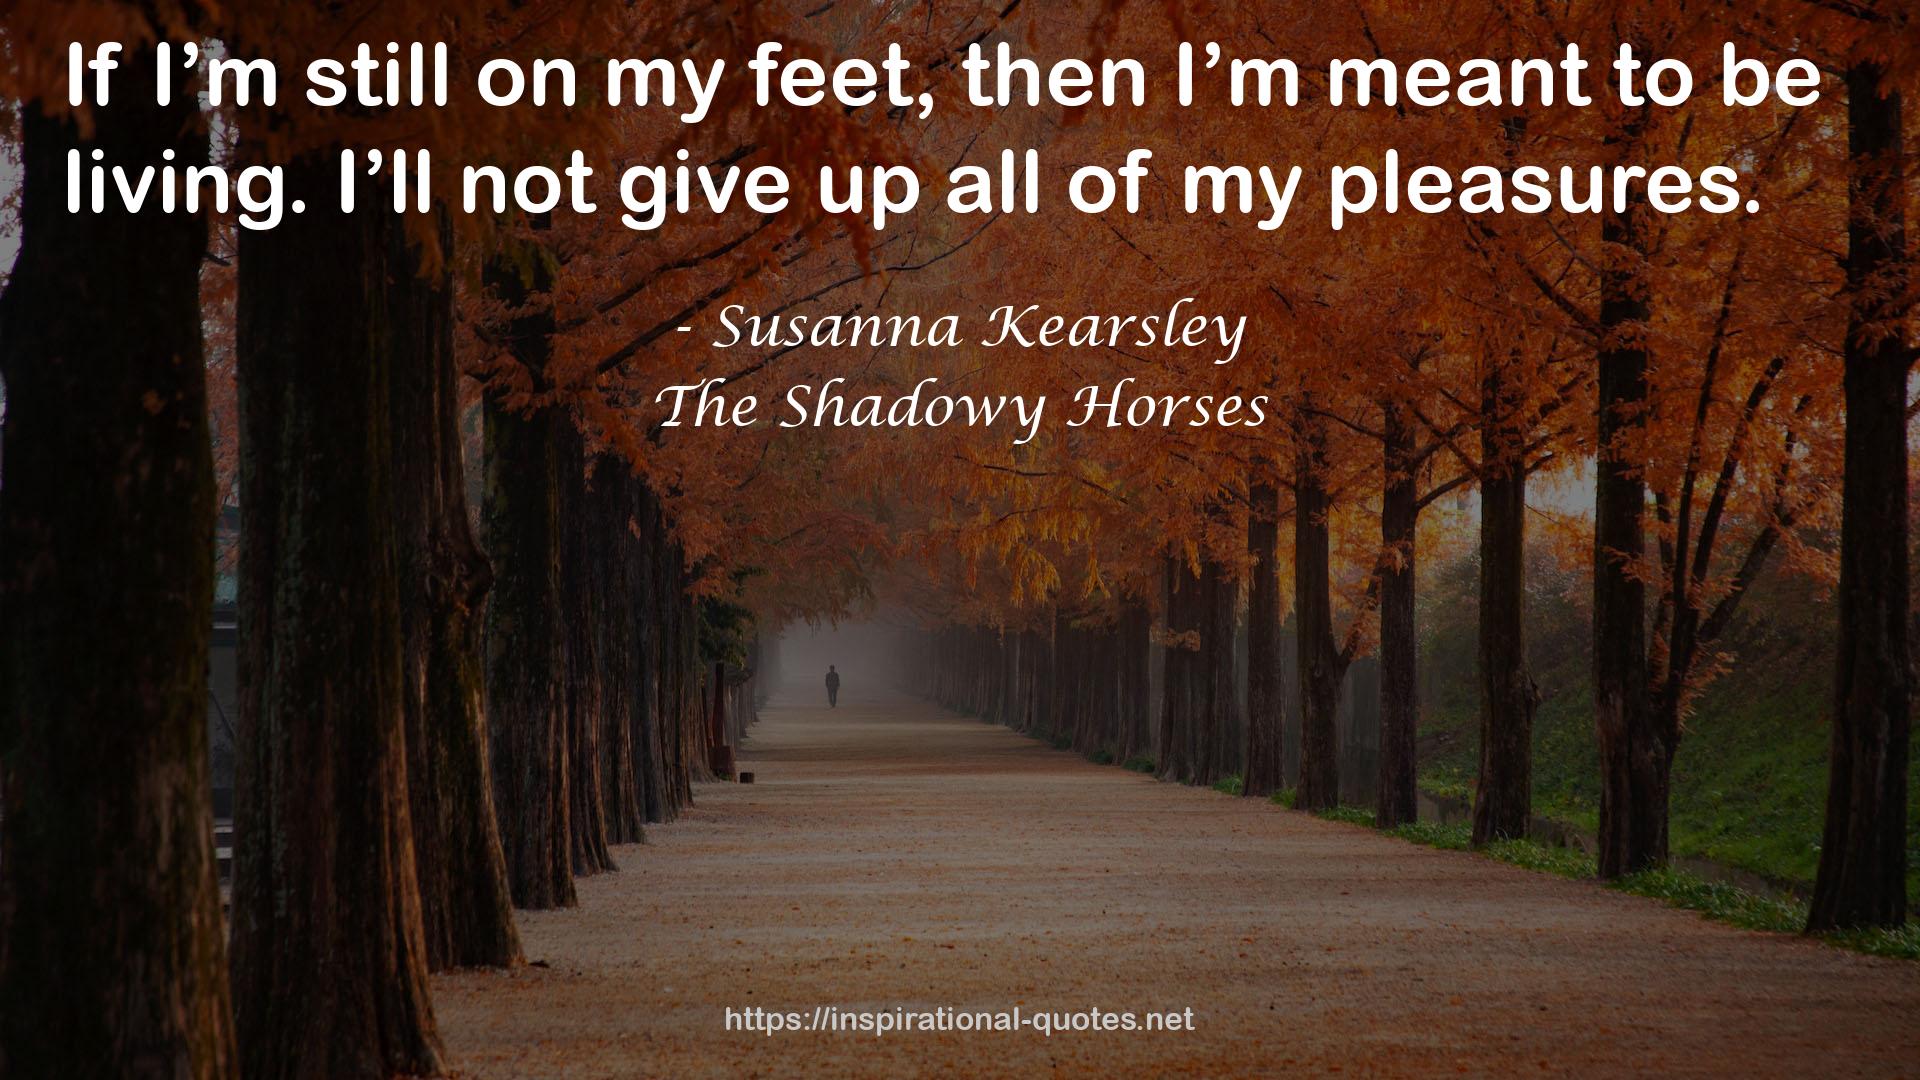 The Shadowy Horses QUOTES